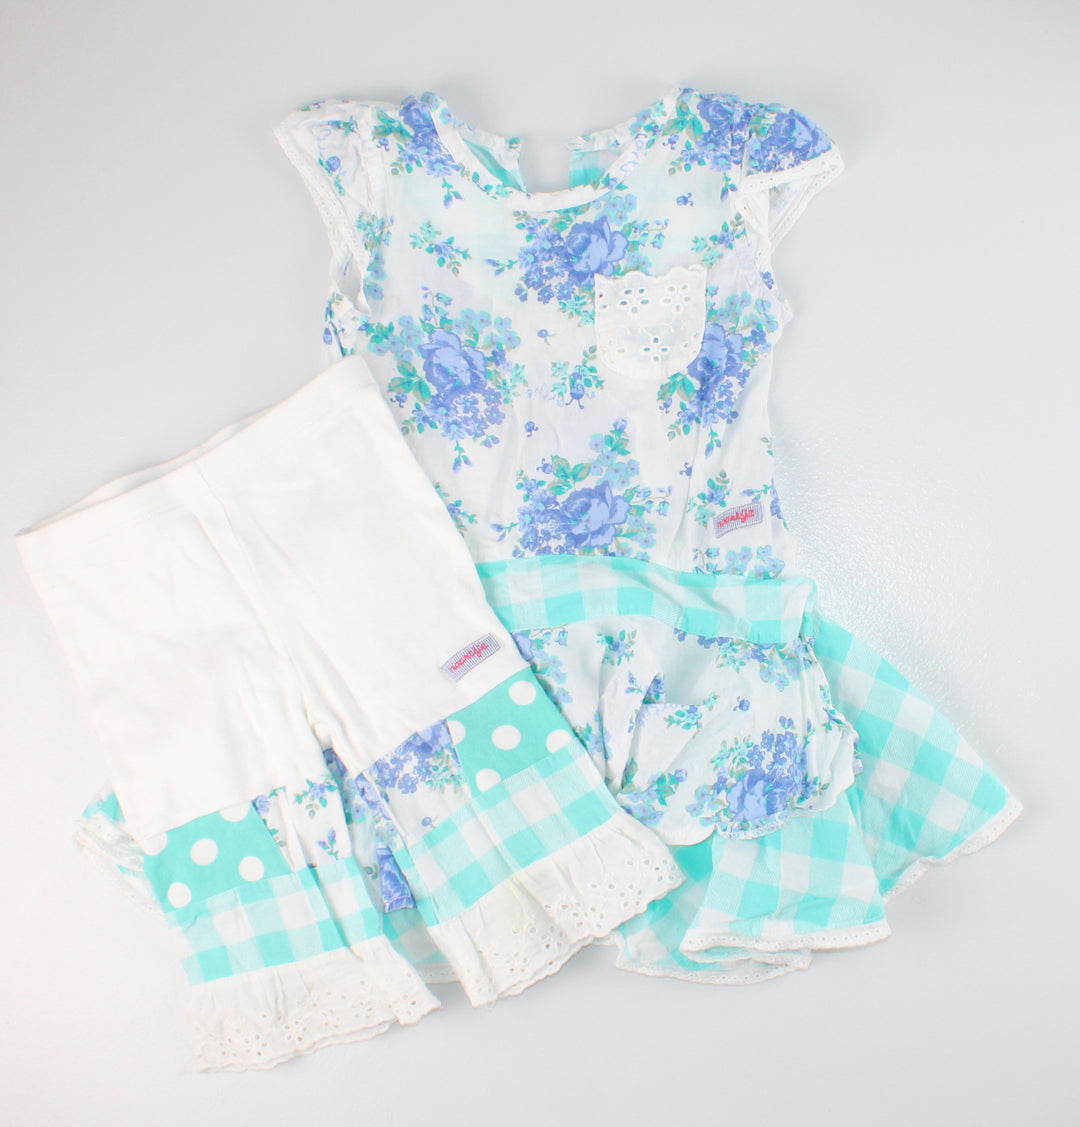 NAARTJIE BLUE FLORAL OUTFIT 12-18M/18-24M EUC